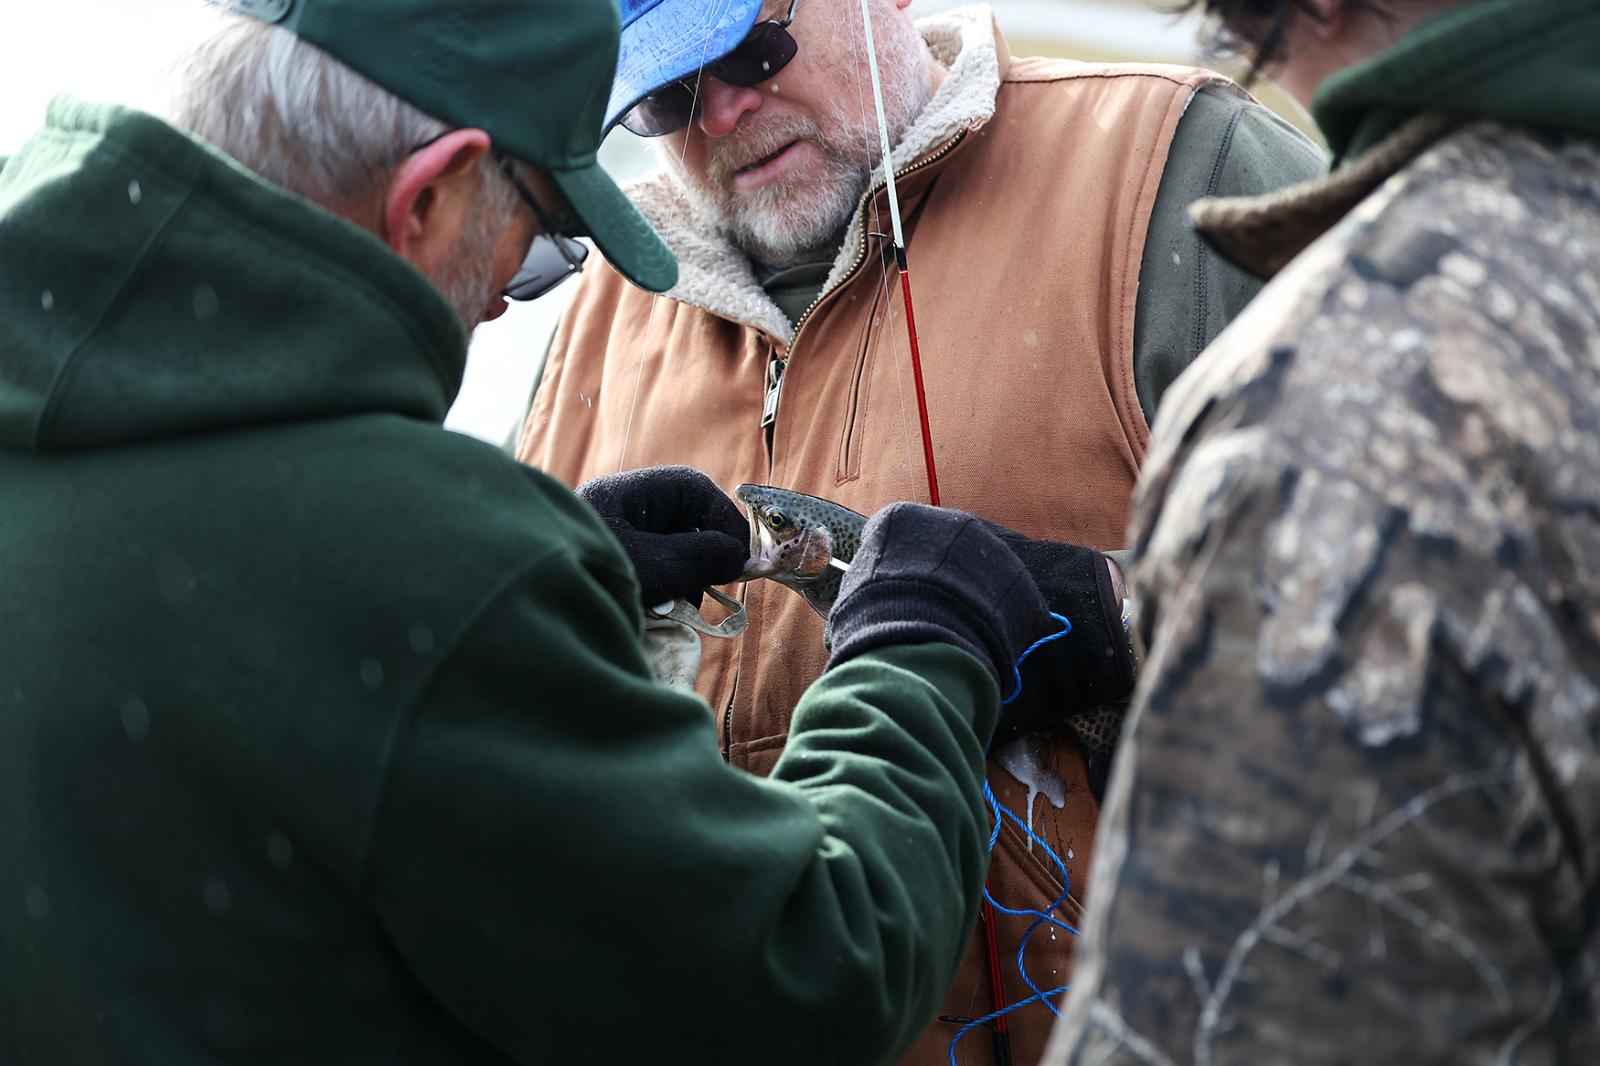 Image from Moments - Fisherman Ron Otto holds a trout after catching it at...